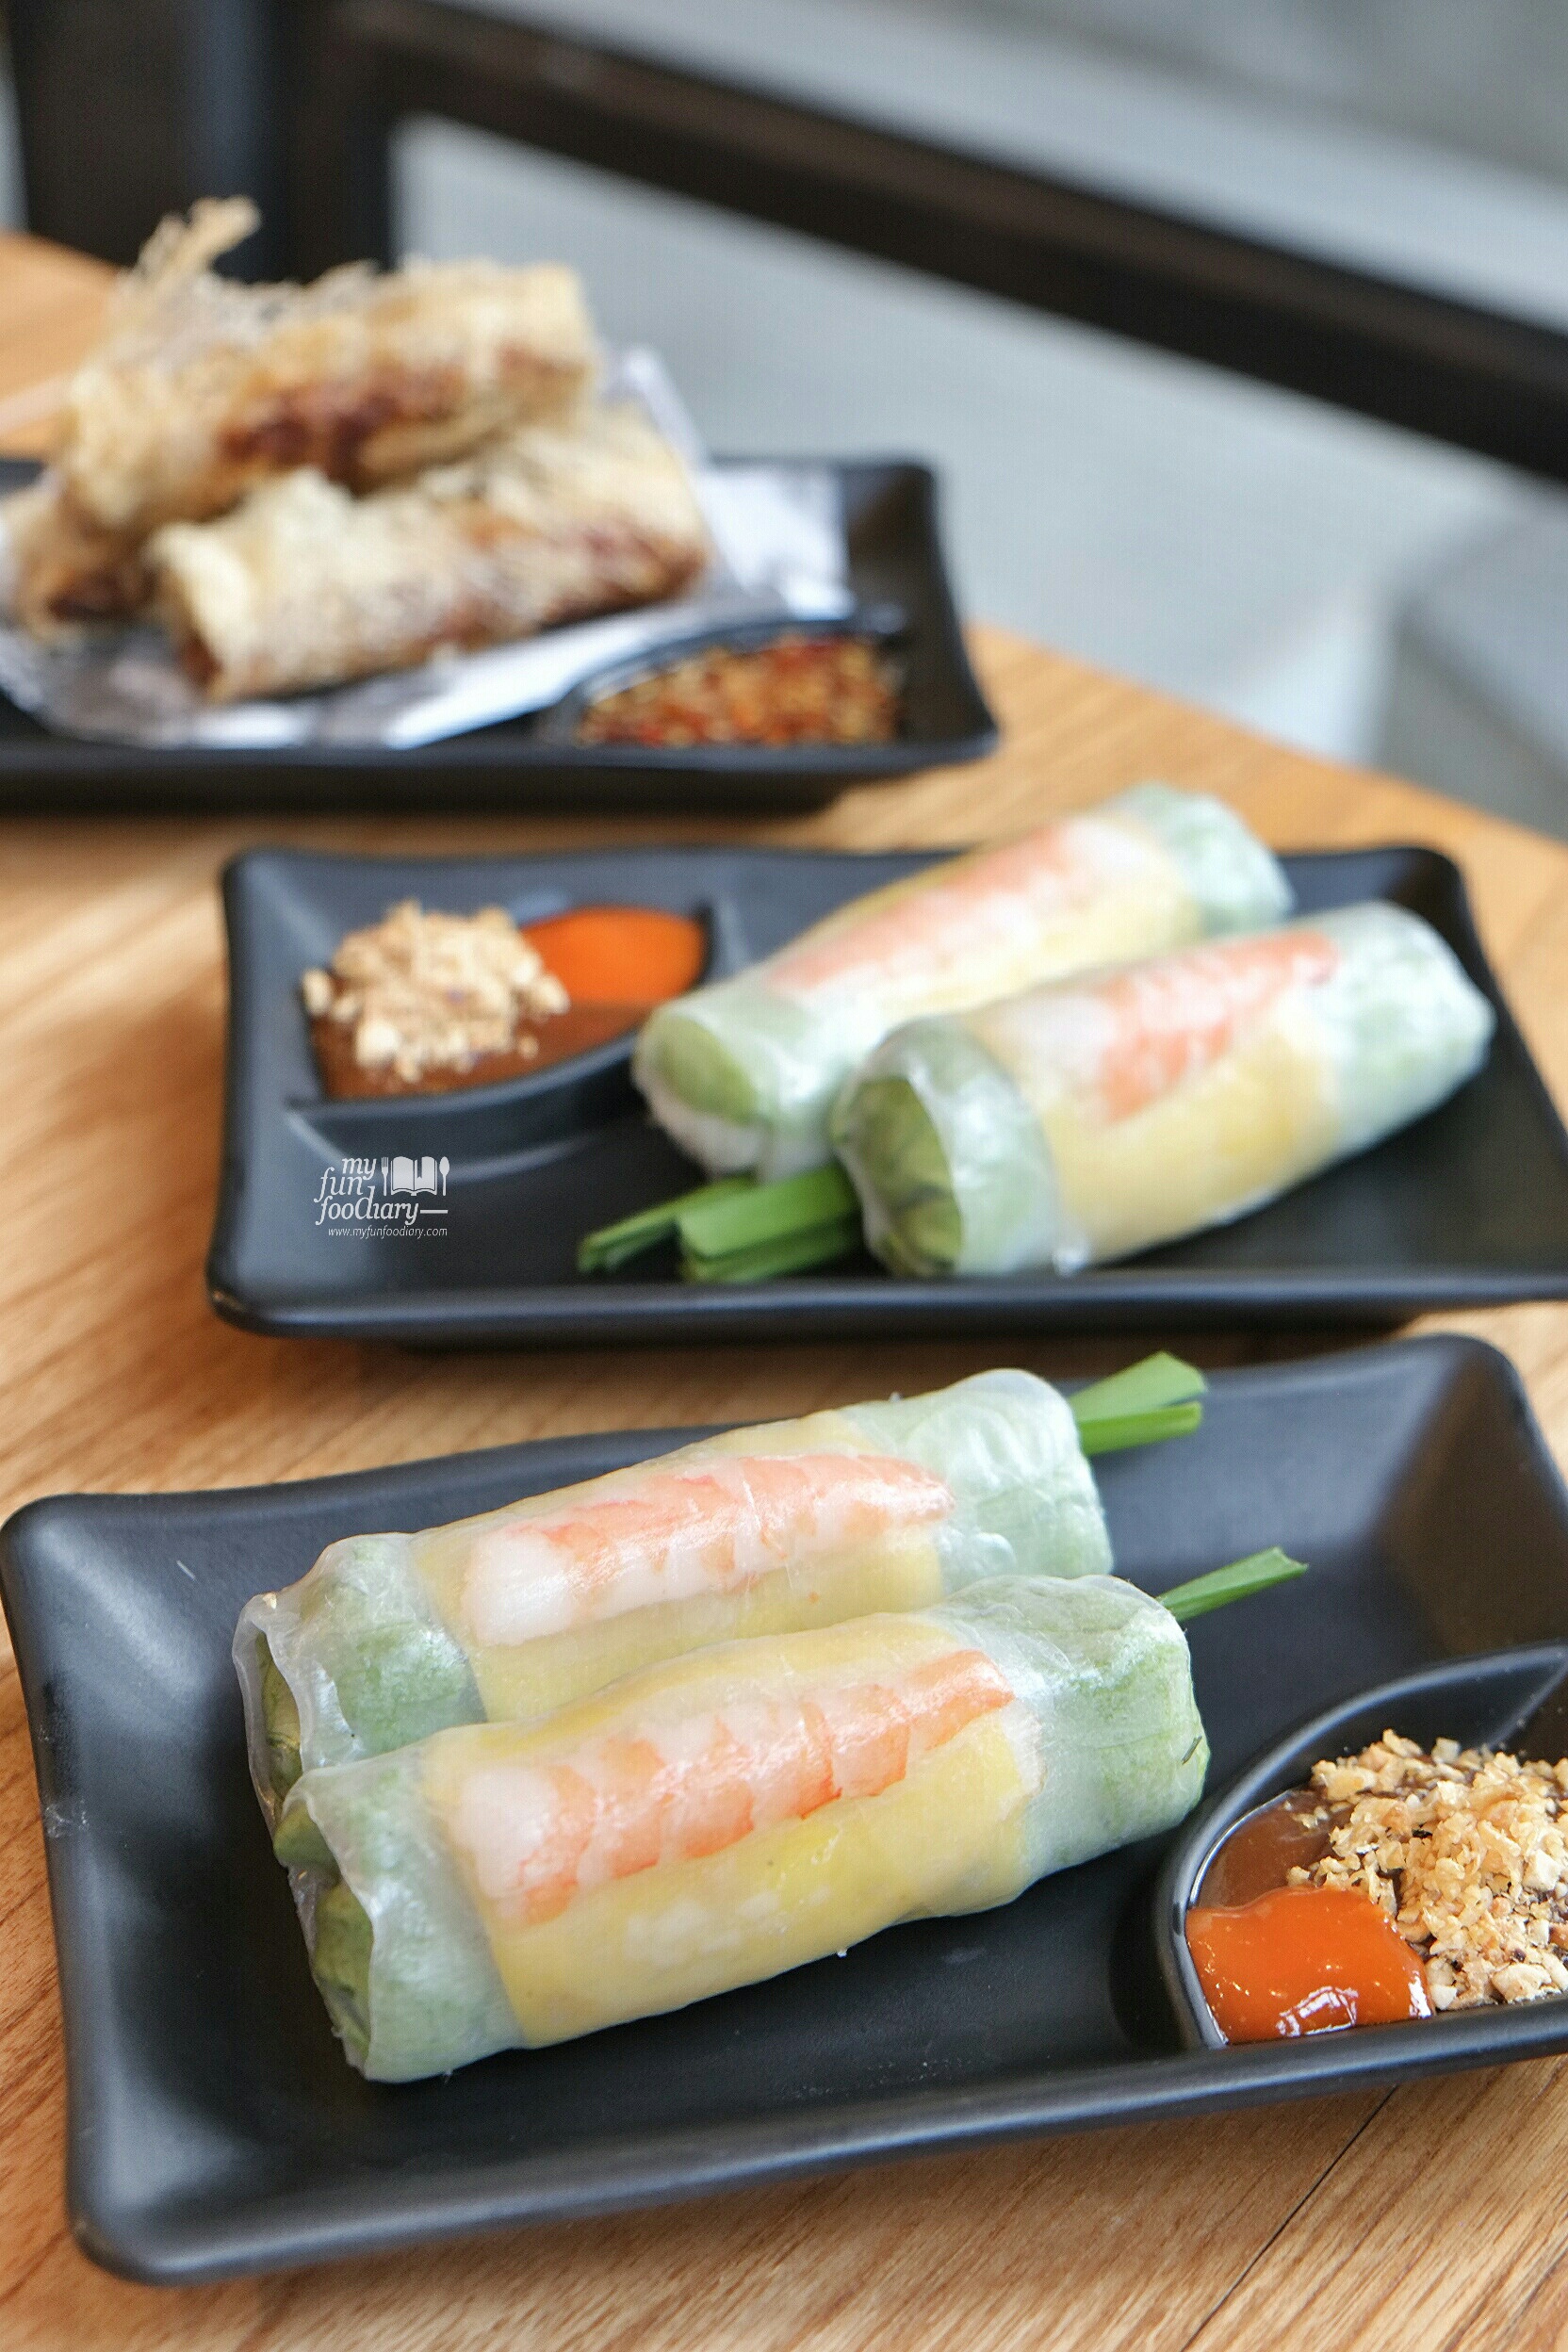 Fresh Southern Rolls at Nam Nam Noodle Bar by Myfunfoodiary